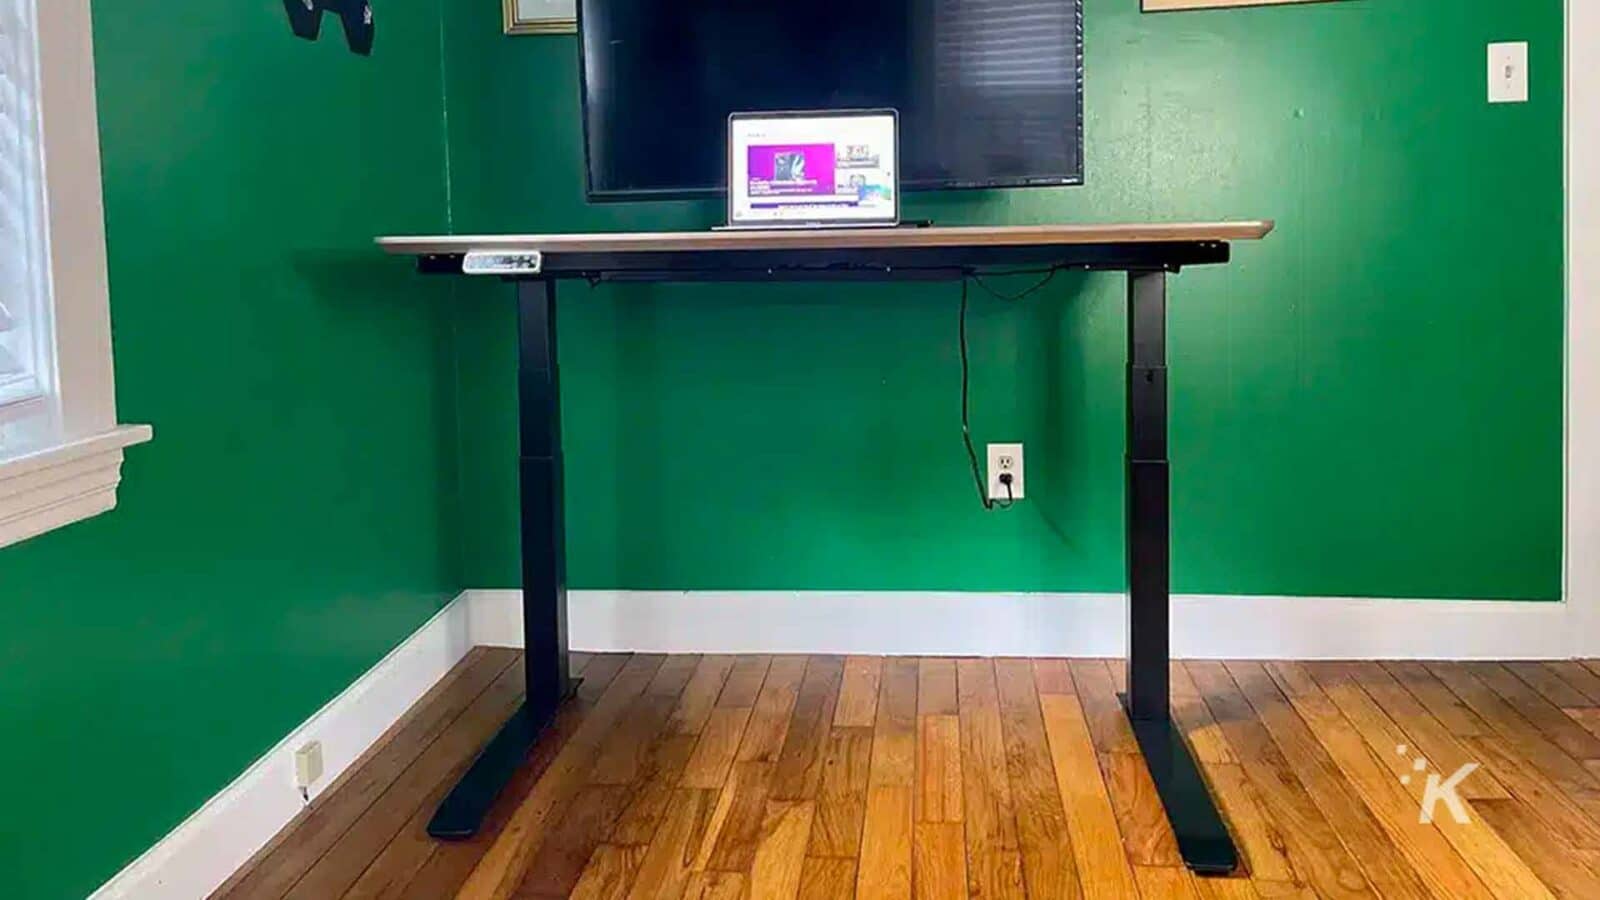 The desk holds a computer.